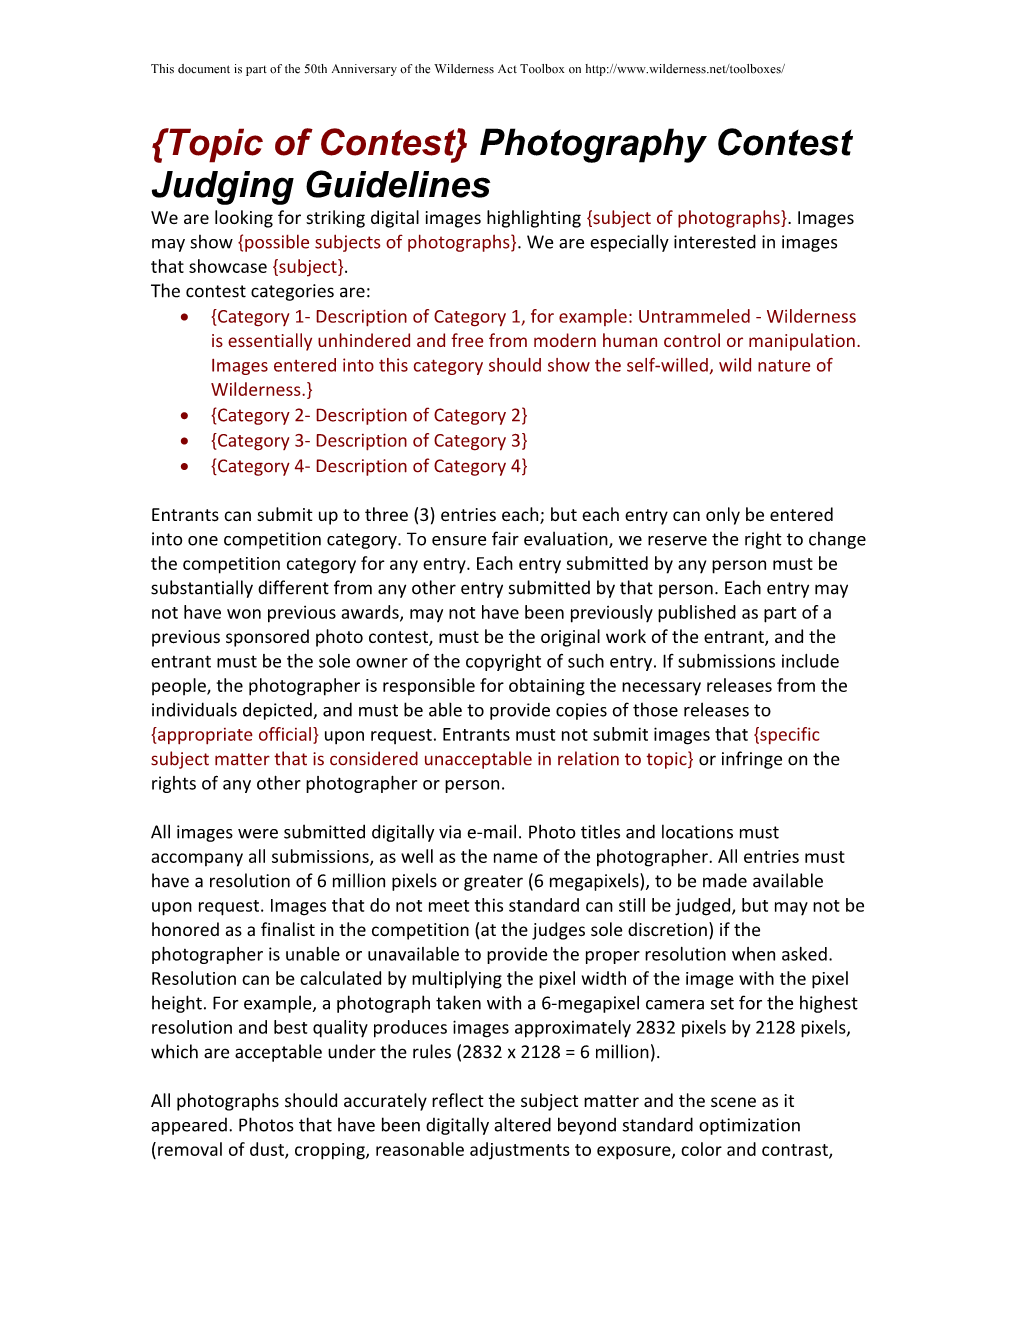 Topic of Contest Photography Contest Judging Guidelines